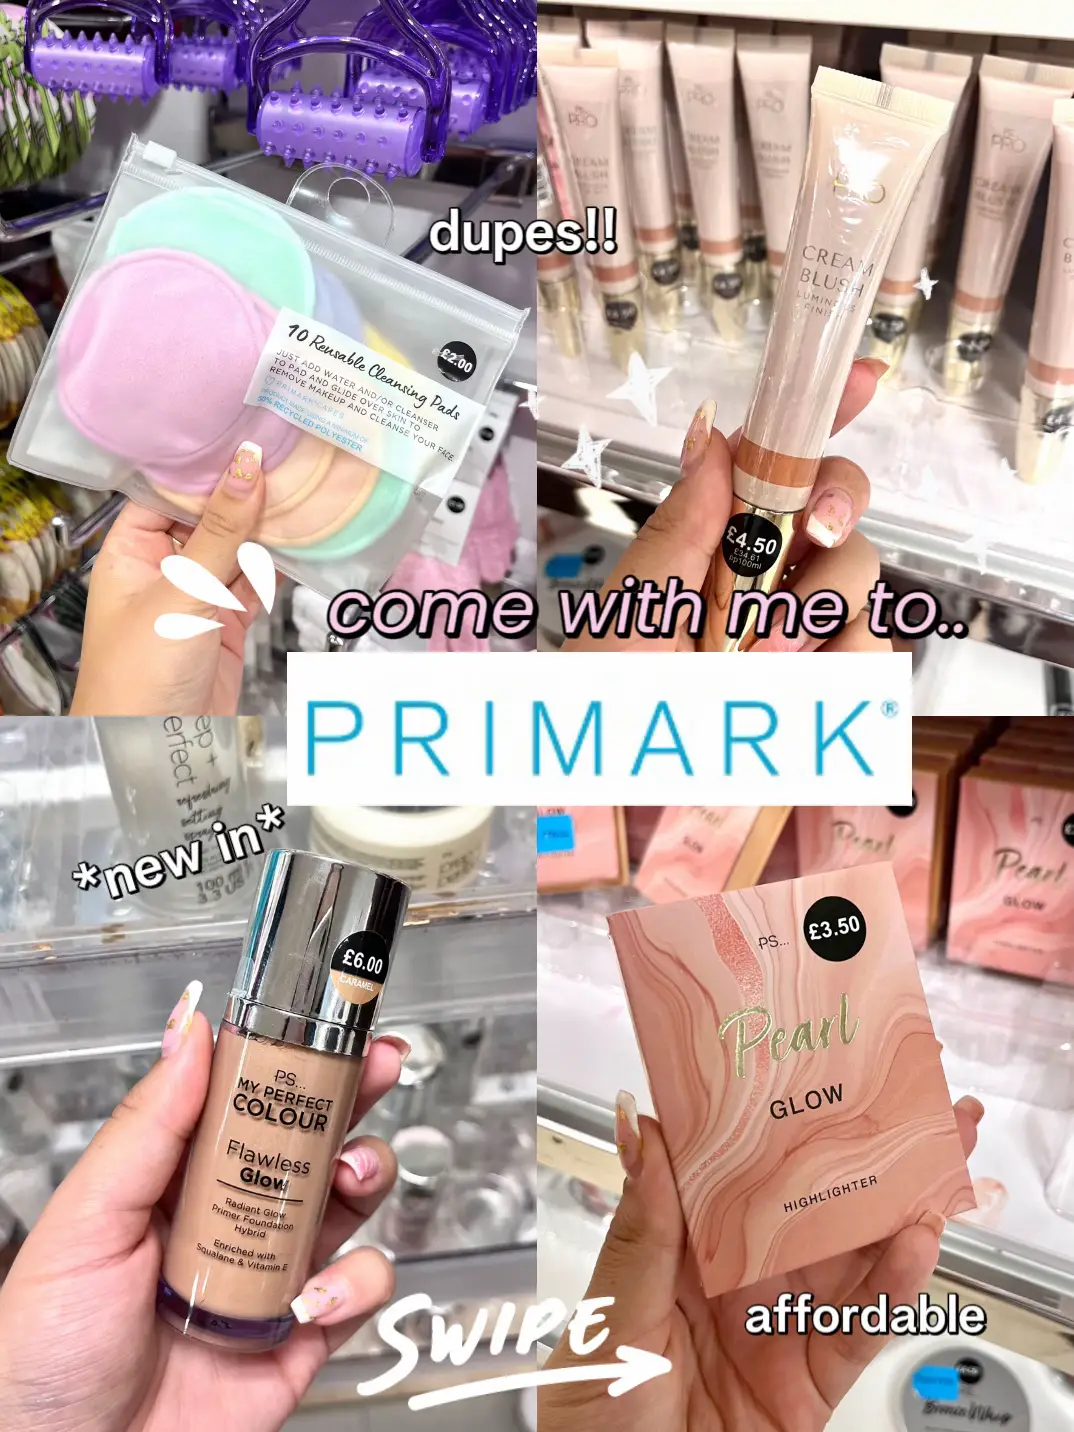 I'm a size 20 and tried on Primark's SKIMS dupe - it gave me an